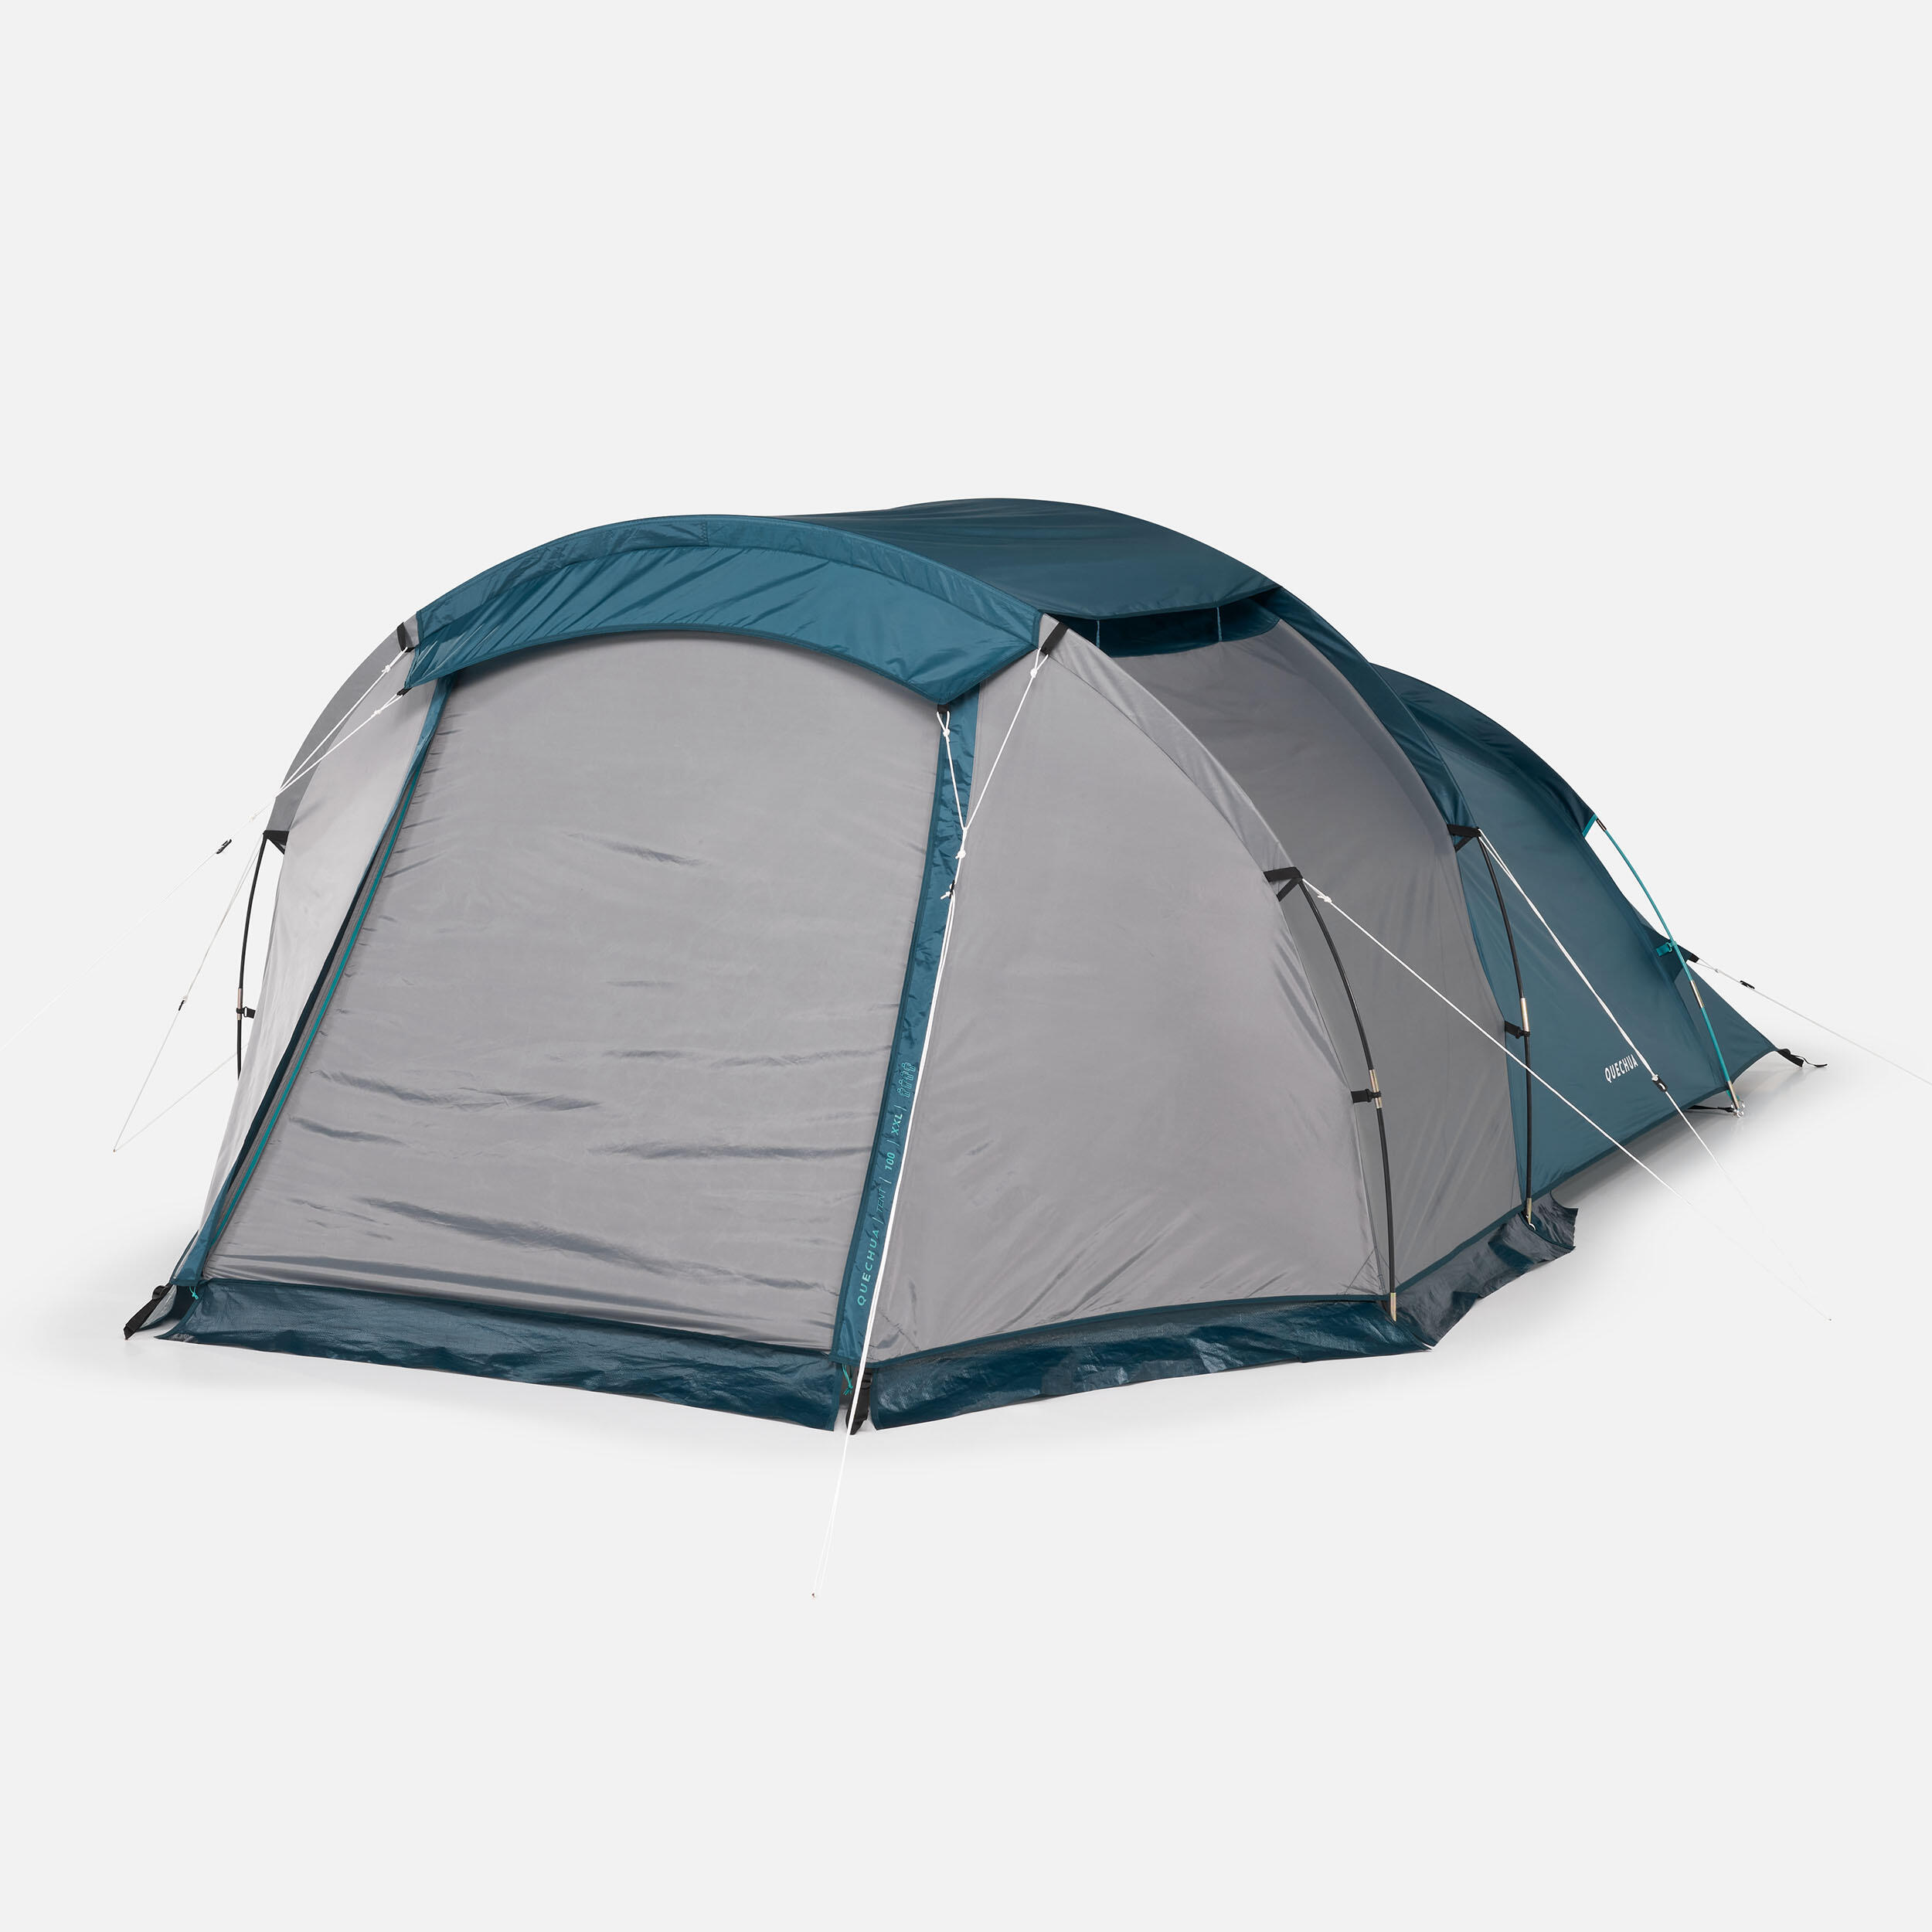 Camping tent - MH100 XXL - 4 person 7/15